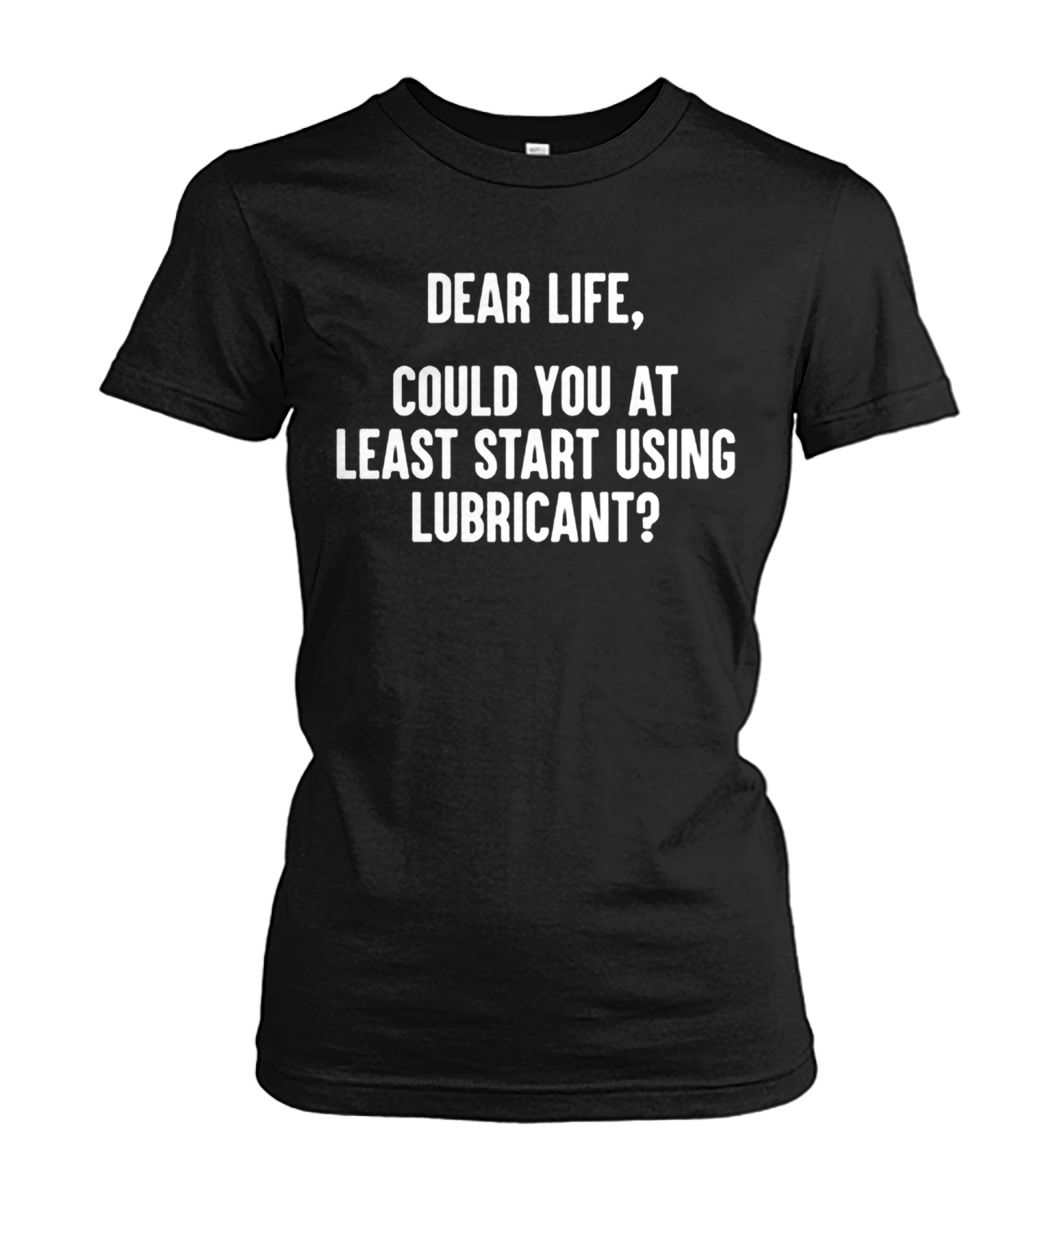 Dear life could at least you start using lubricant women's crew tee